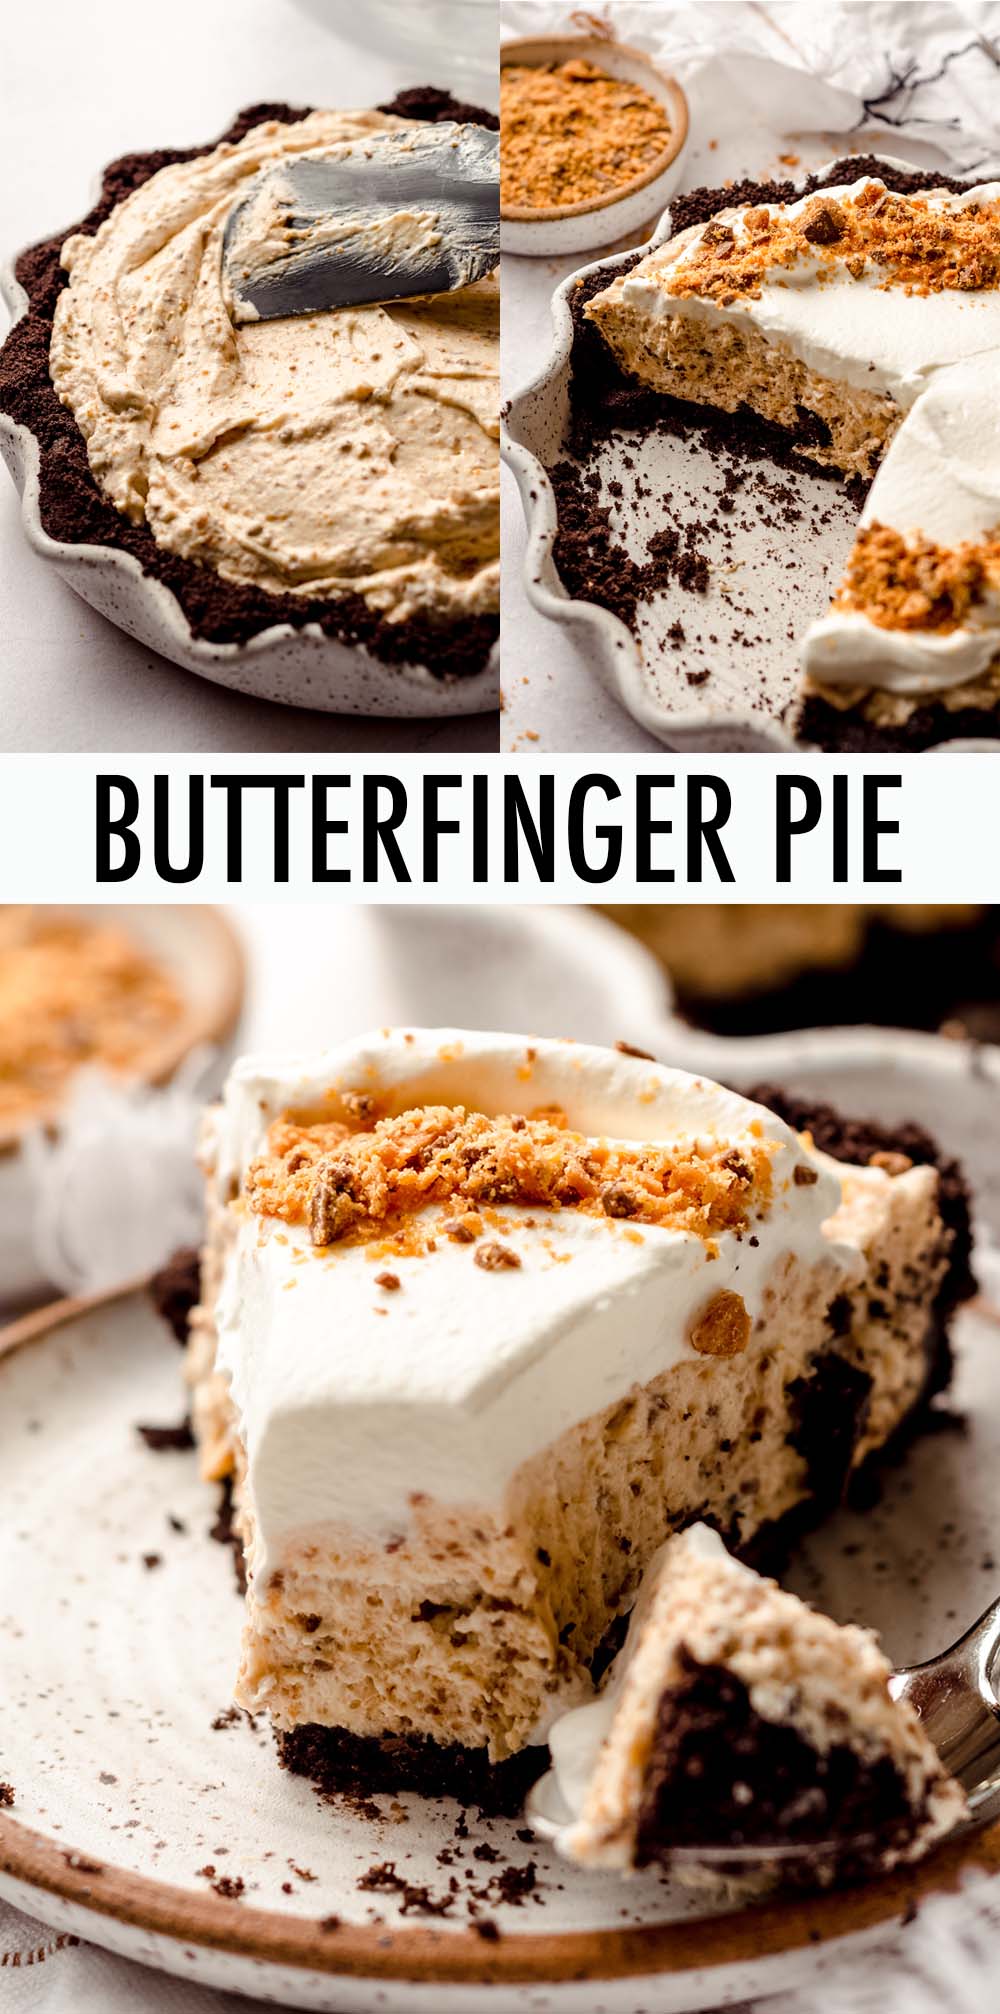 An easy, creamy no bake pie made with a simple Oreo cookie crust and filled with chunks of crushed Butterfinger candy and topped with fluffy homemade whipped cream. via @frshaprilflours